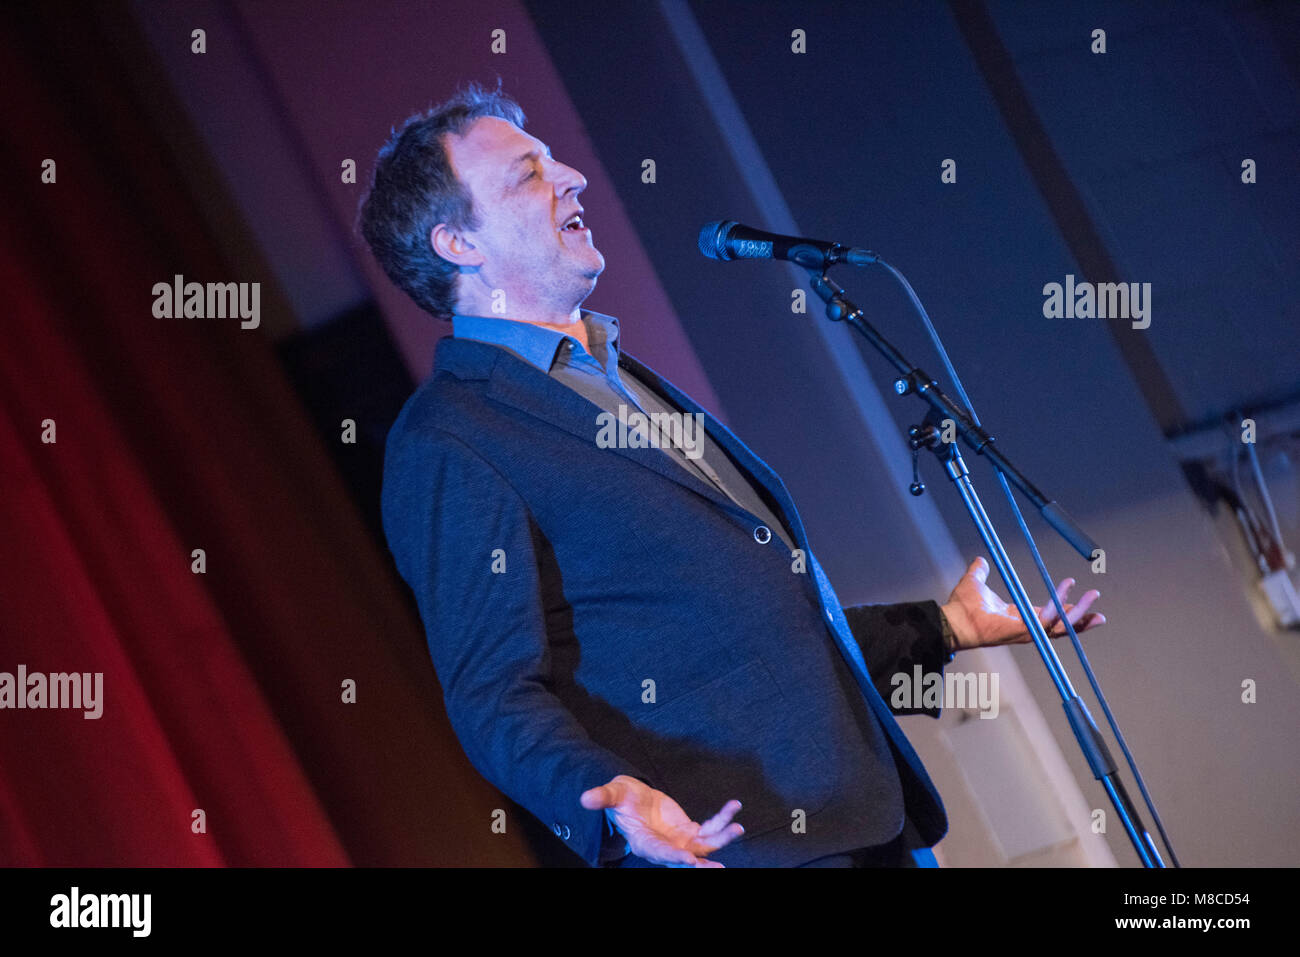 Misha Glenny author , journalist, former BBC Moscow Correspondent found notoriety with his book about Russian Mafia 'McMafia' turned into BBC drama of the same name. Pictured @ Bookslam @ York Hall, Bethnal Green east London. Stock Photo